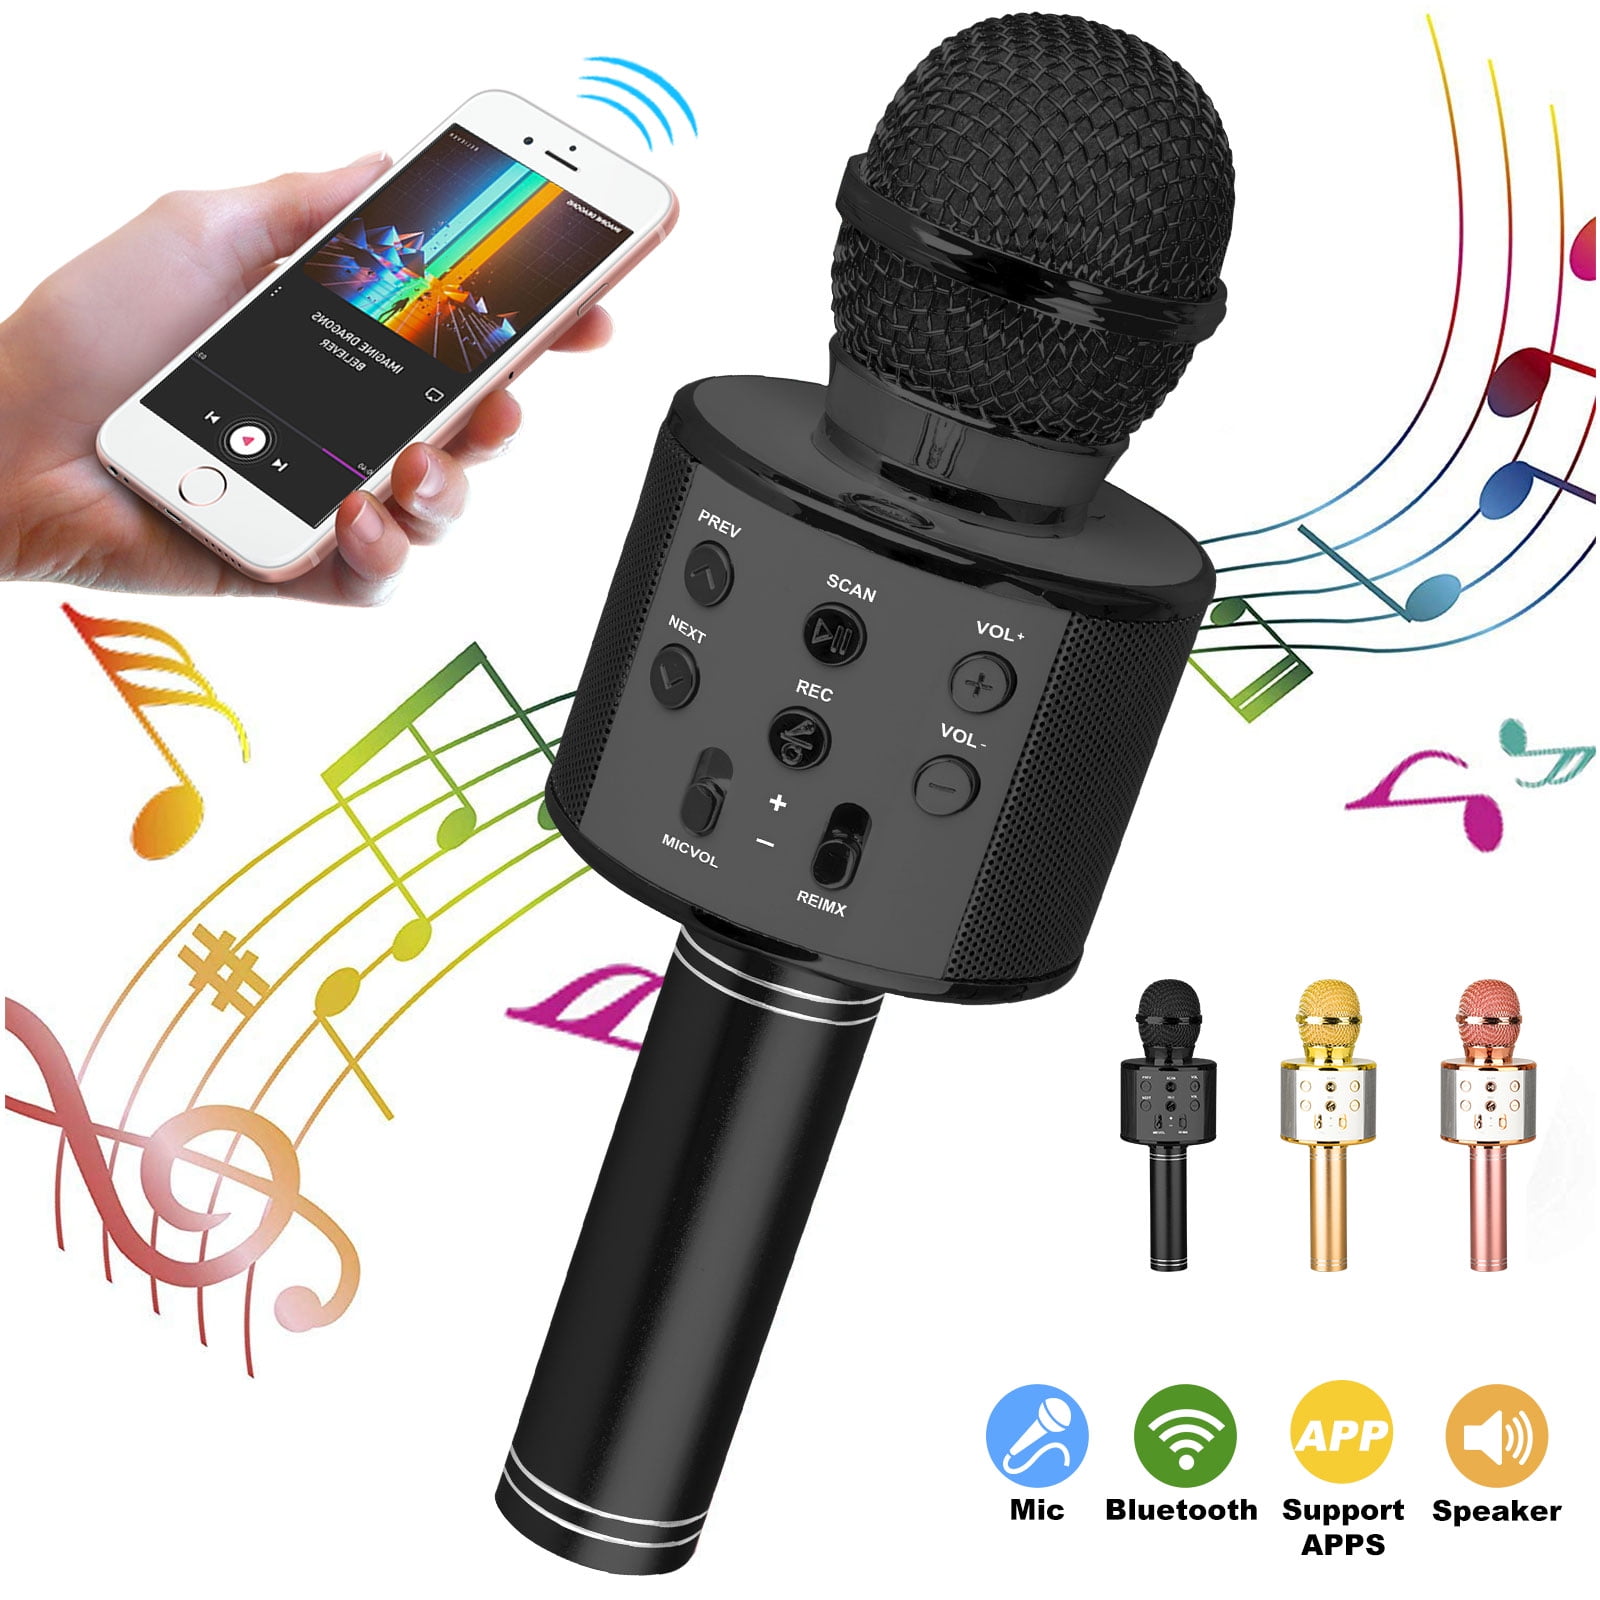 Wireless Bluetooth Microphone for Kids 4-in-1 Toy Microphone Echo Mic Karaoke Machine Portable Handheld Microphones Christmas Birthday Gifts for Toddler Children Boy Girls Kids Karaoke Microphone